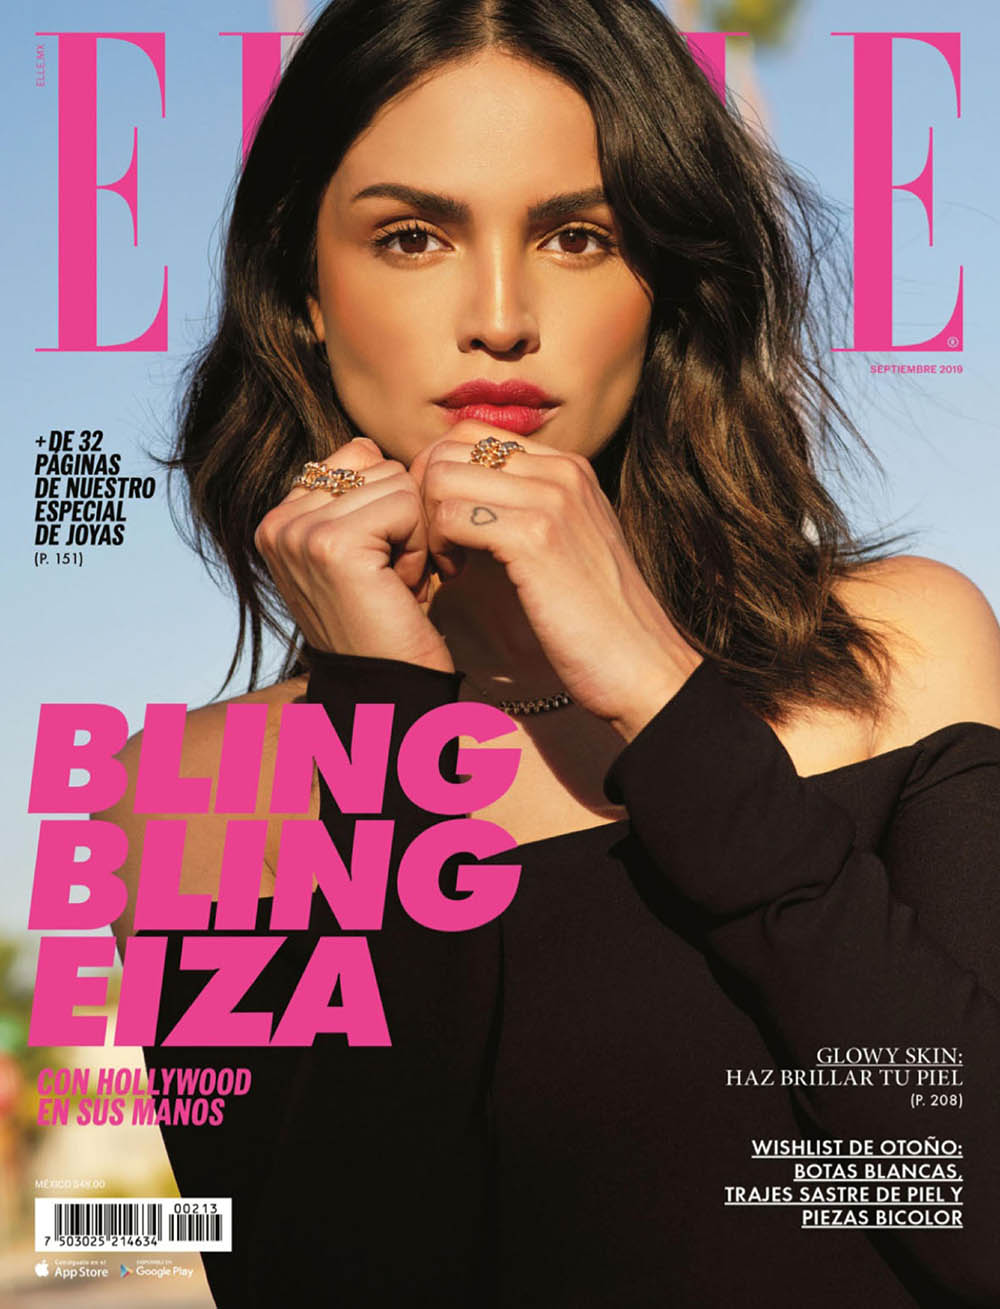 Eiza González covers Elle Mexico September 2019 by Remember When We Were Young